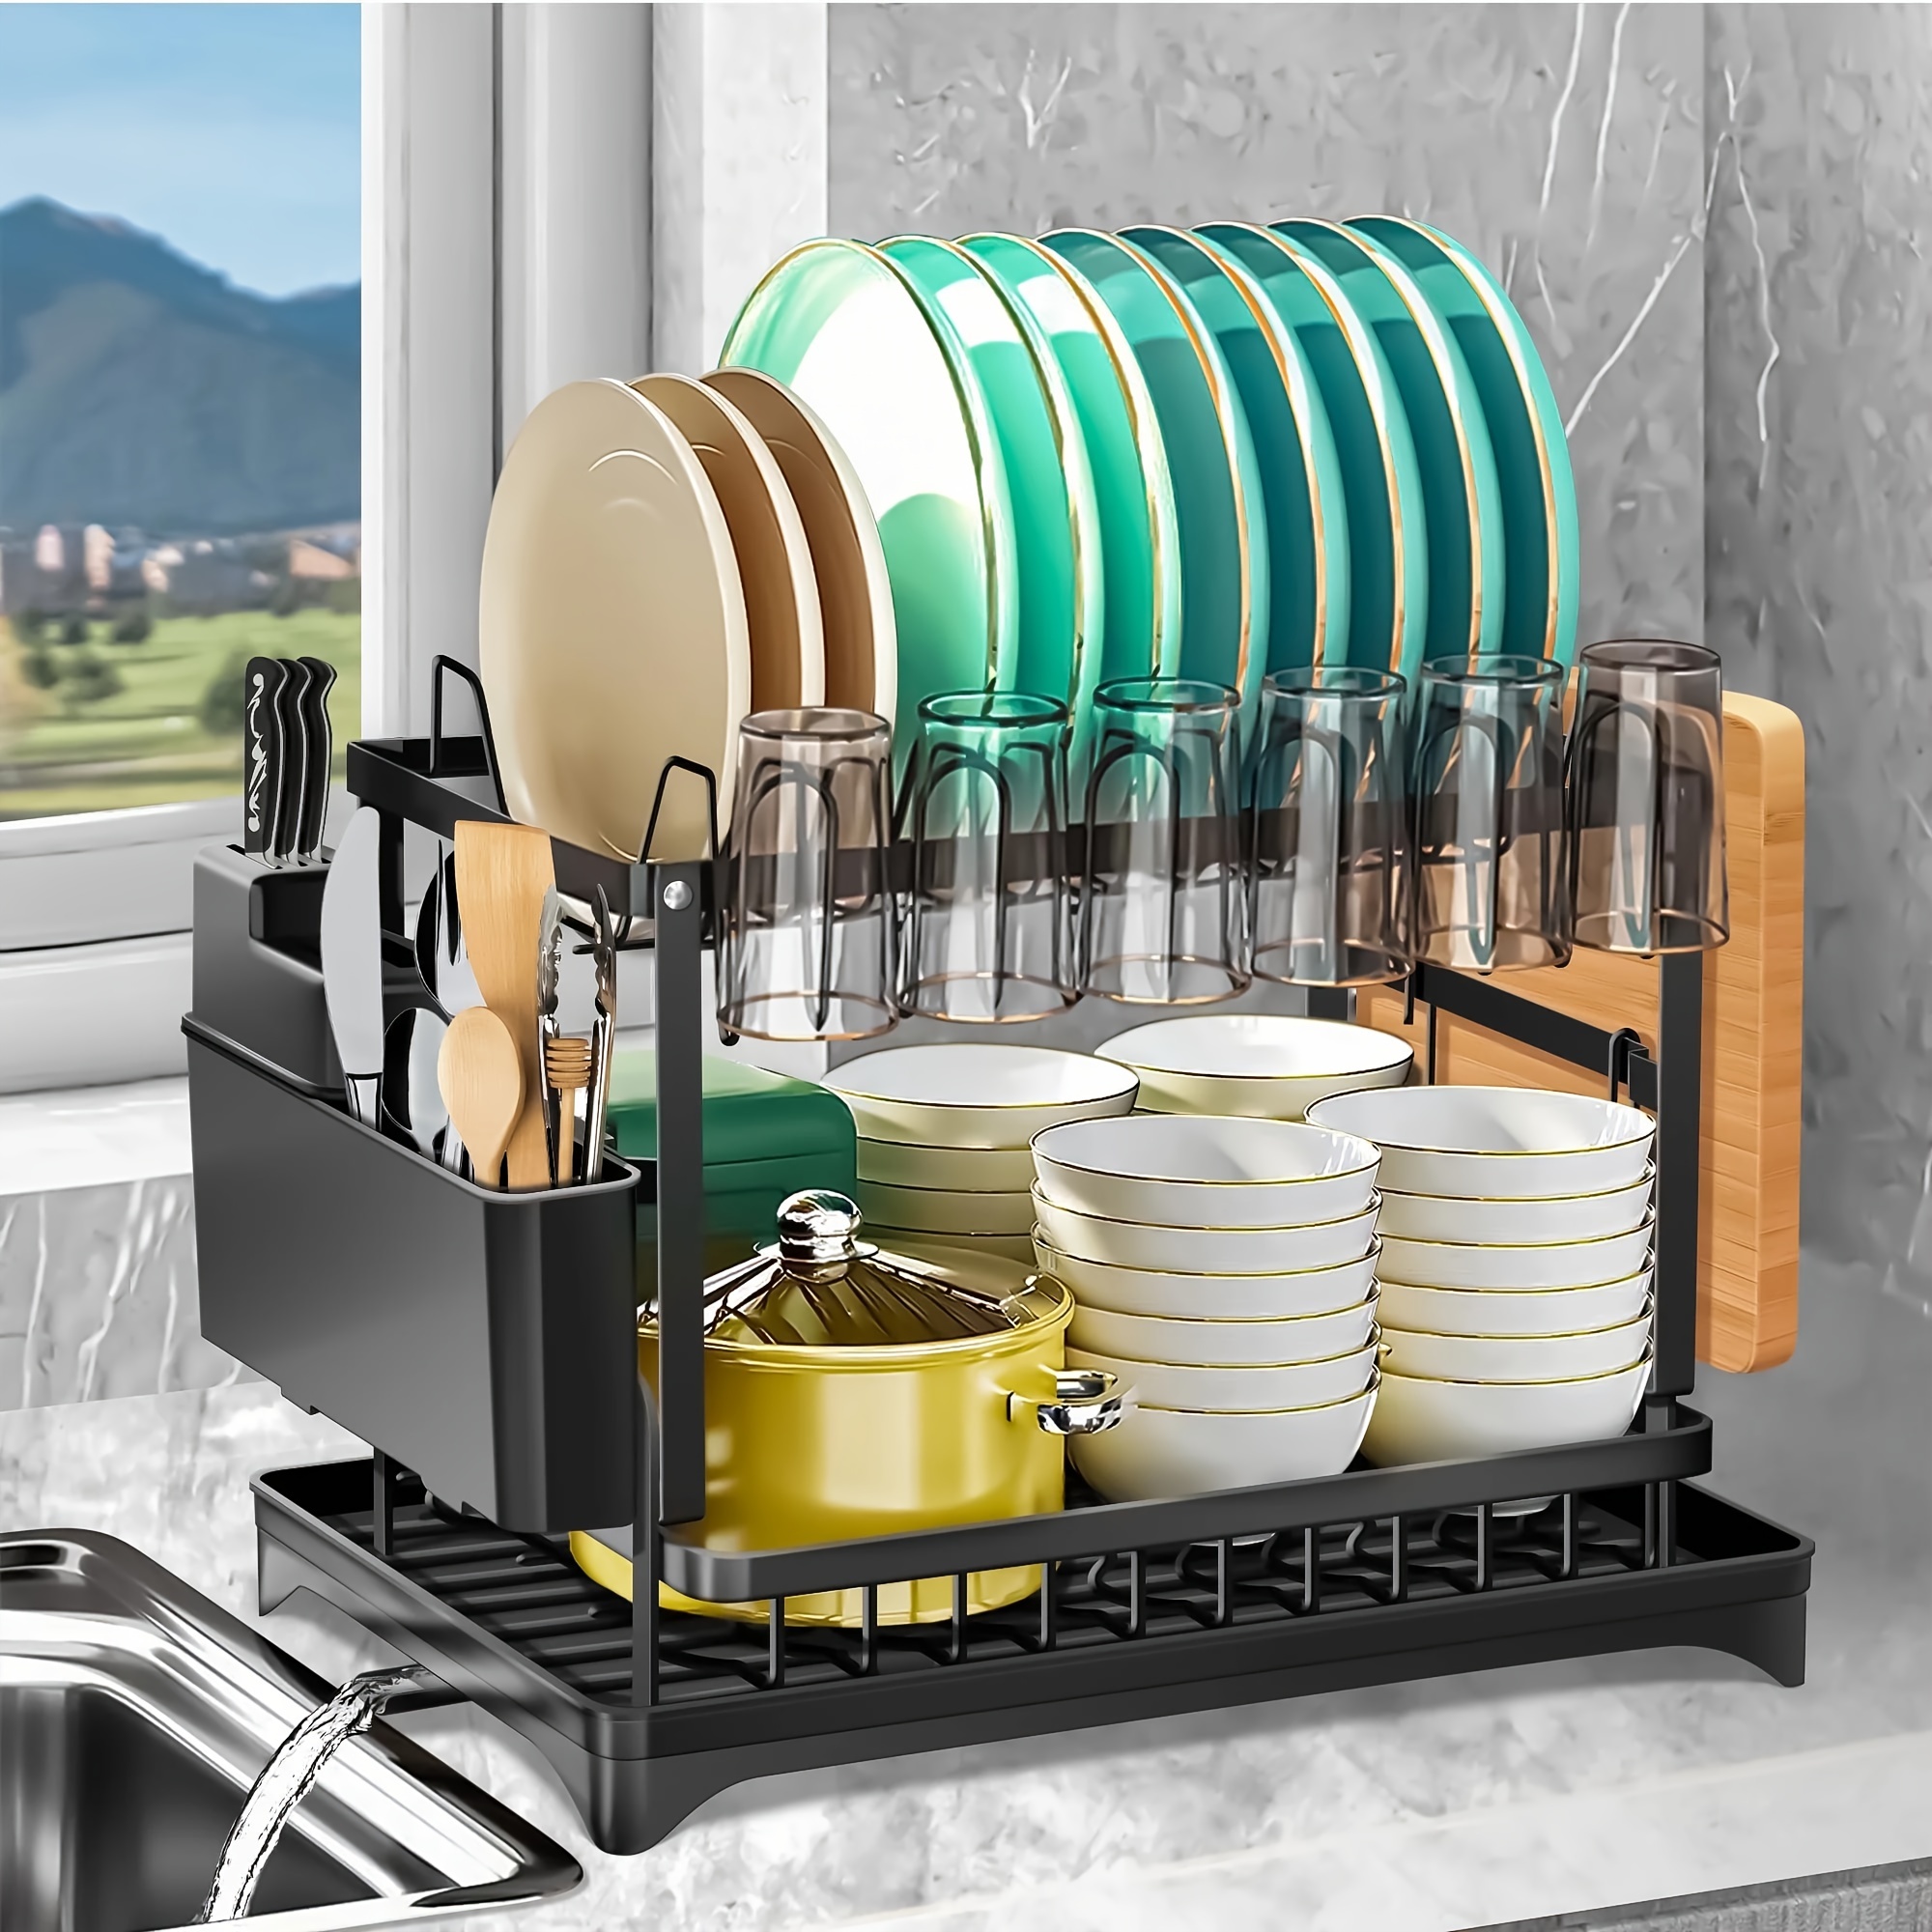 

2 Tier Dish Racks For Kitchen Counter, Dish Drying Rack With Dish Drainer, Durable Stainless Steel Dish Rack Drain Set With Utensil Holder, Cutting Board Holder, Kitchen Dishes Organizers